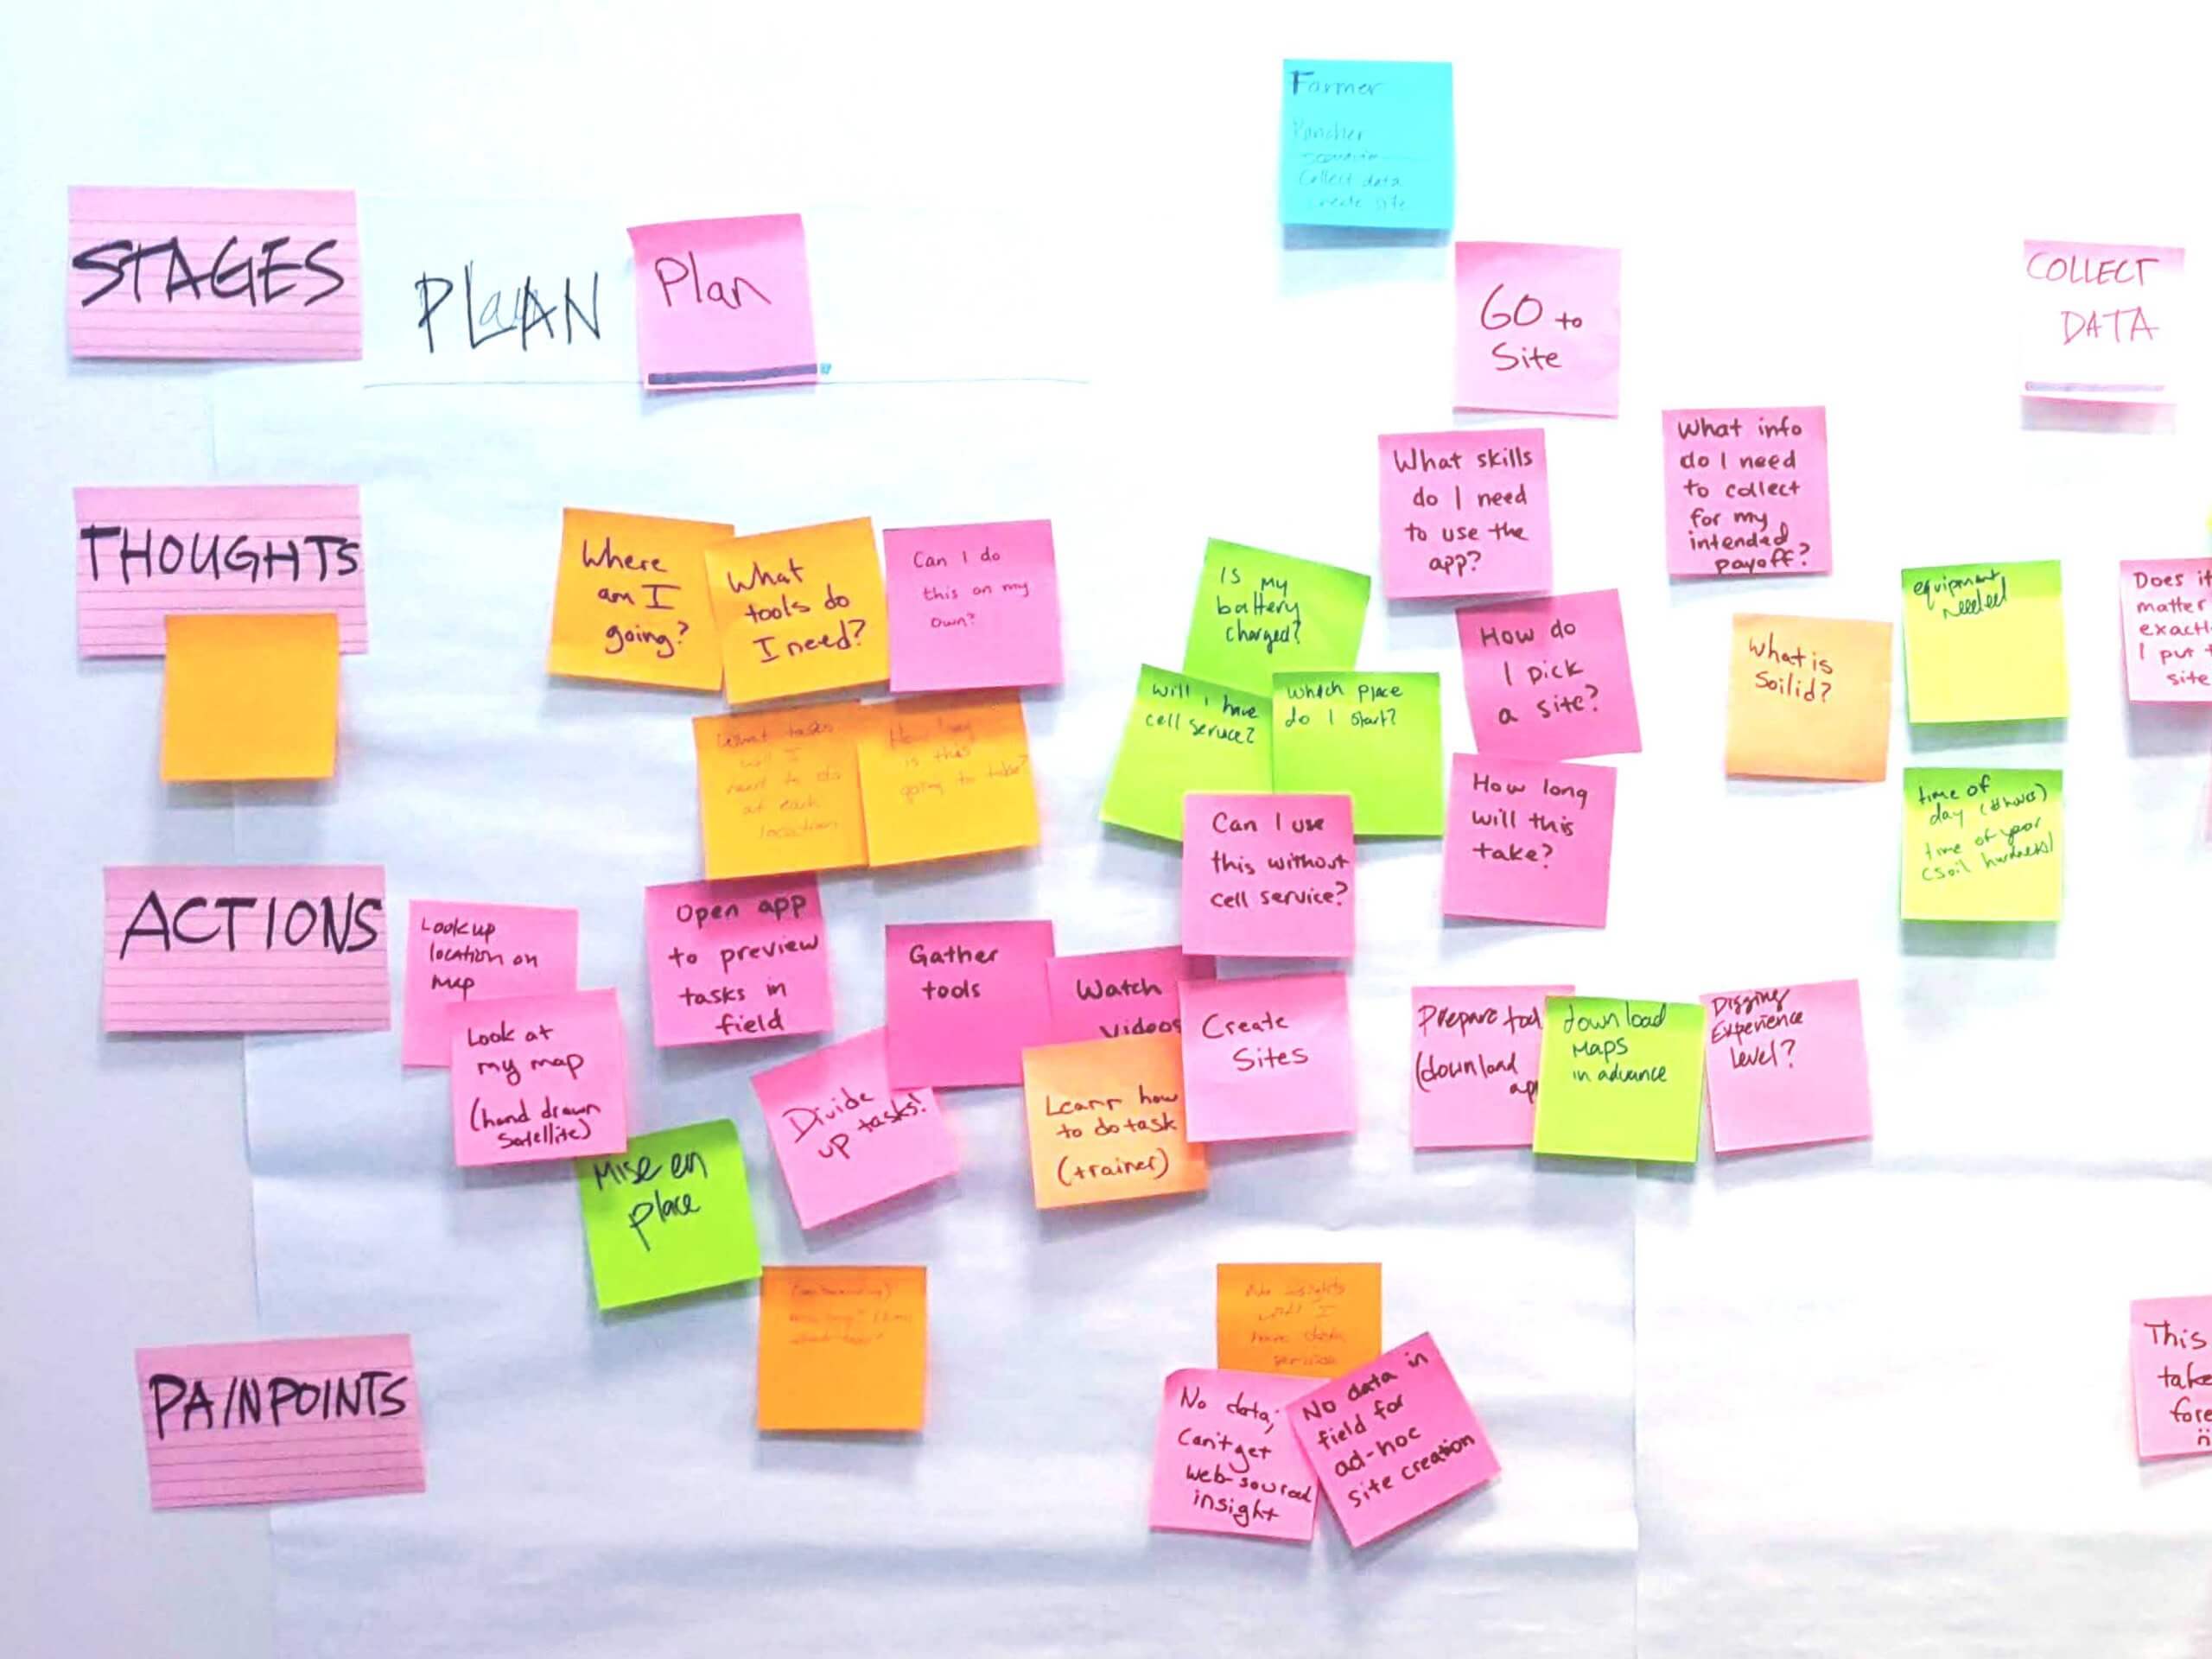 a collection of post-it cards on a wall, arrange in a user journey map